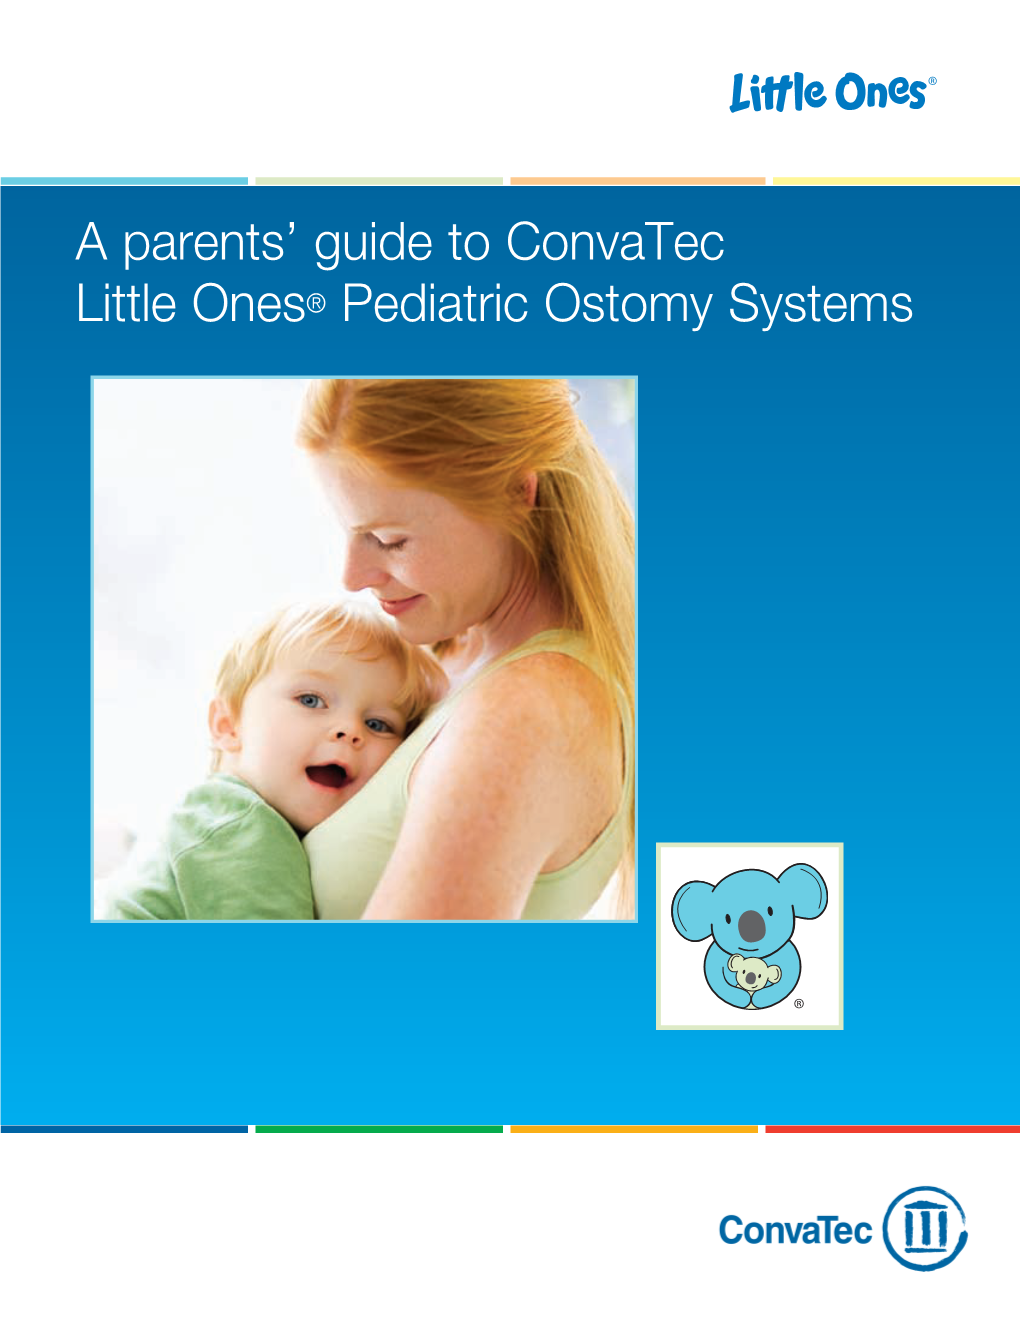 A Parents' Guide to Convatec Little Ones® Pediatric Ostomy Systems